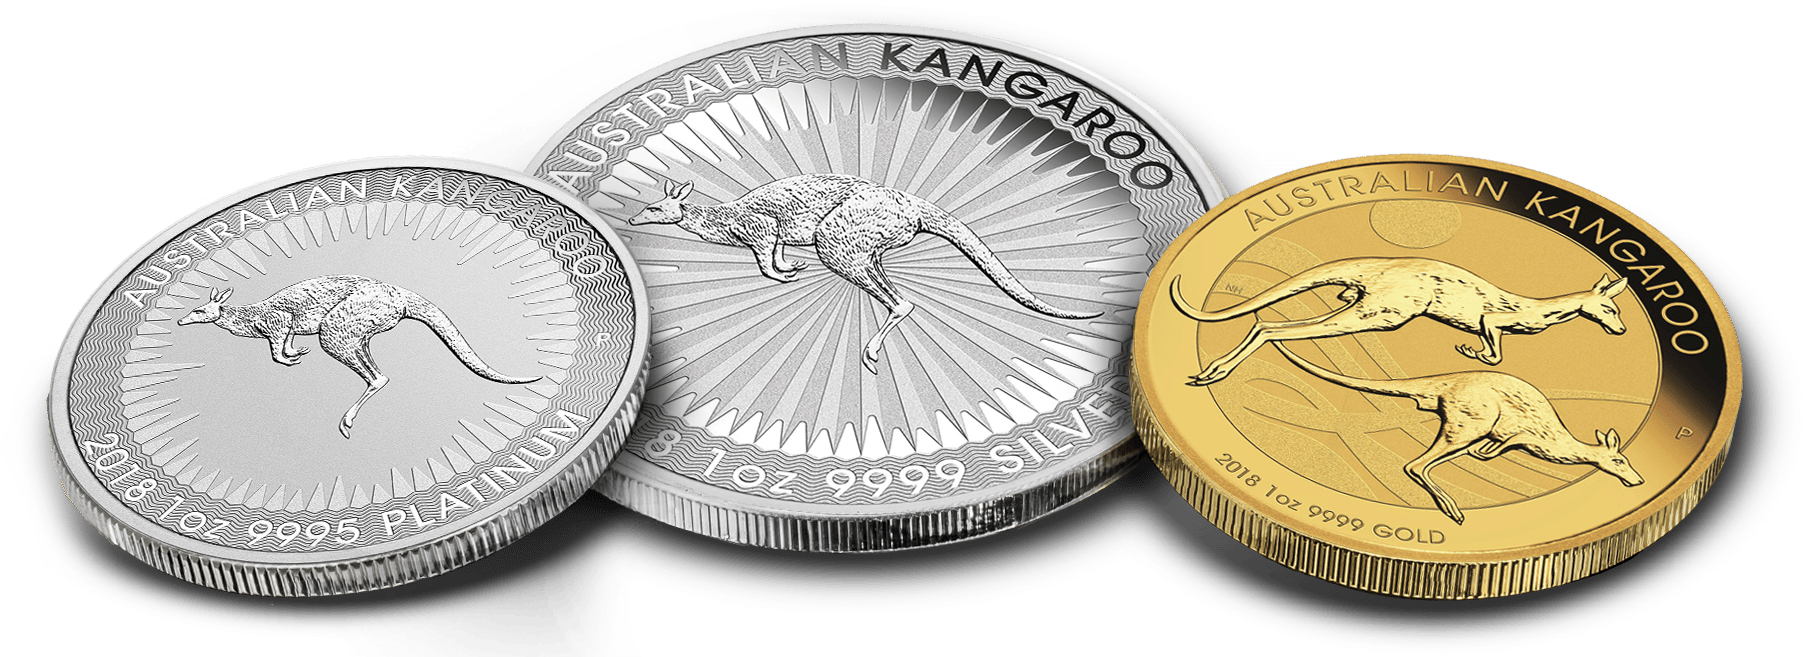 Three Australian Kangaroos, featuring two Silver coins and one Gold coin.